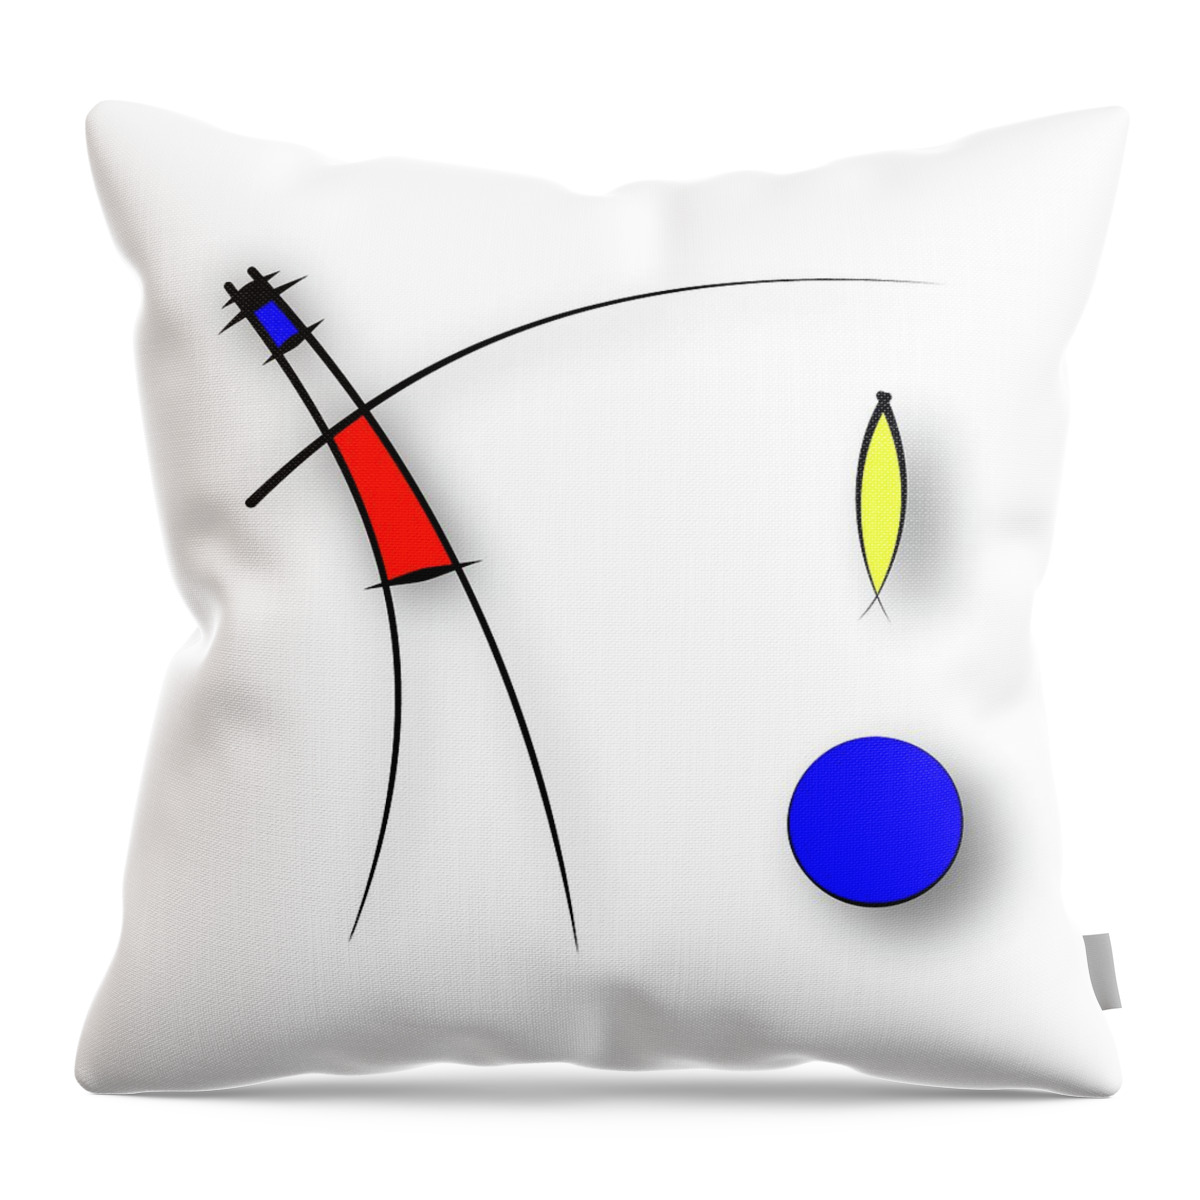 Fisherman Throw Pillow featuring the digital art Fisherman s by Pal Szeplaky